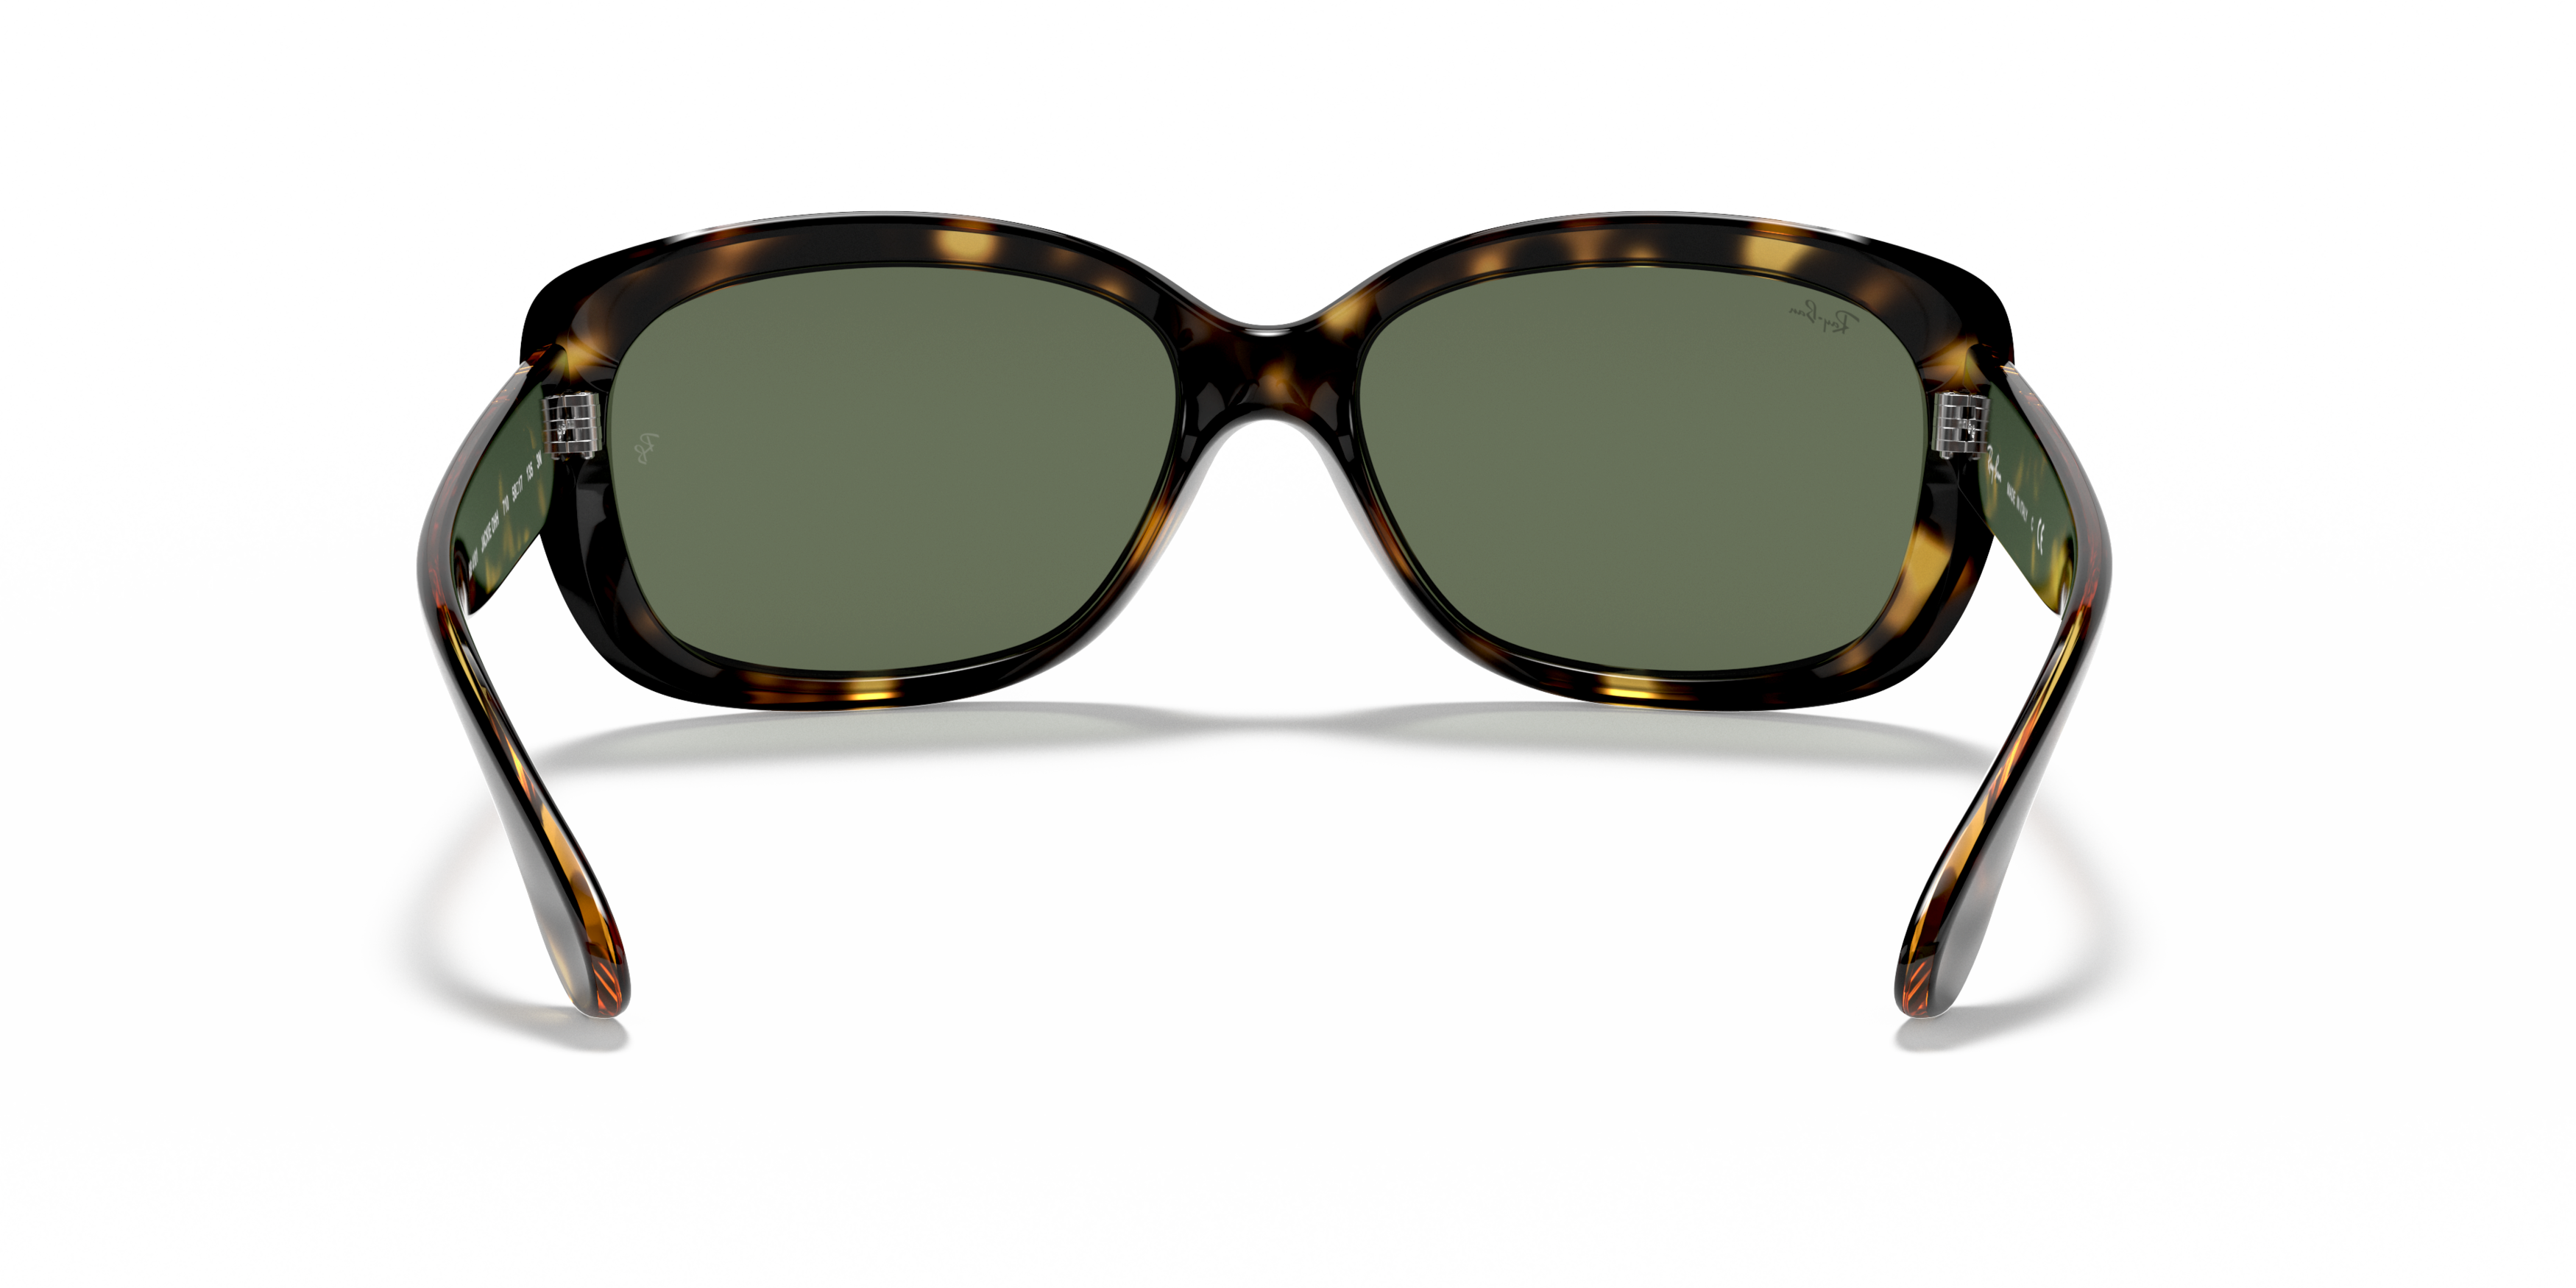 Detail02 Ray-Ban Jackie Ohh RB 4101 (710) Sunglasses Green / Tortoise Shell